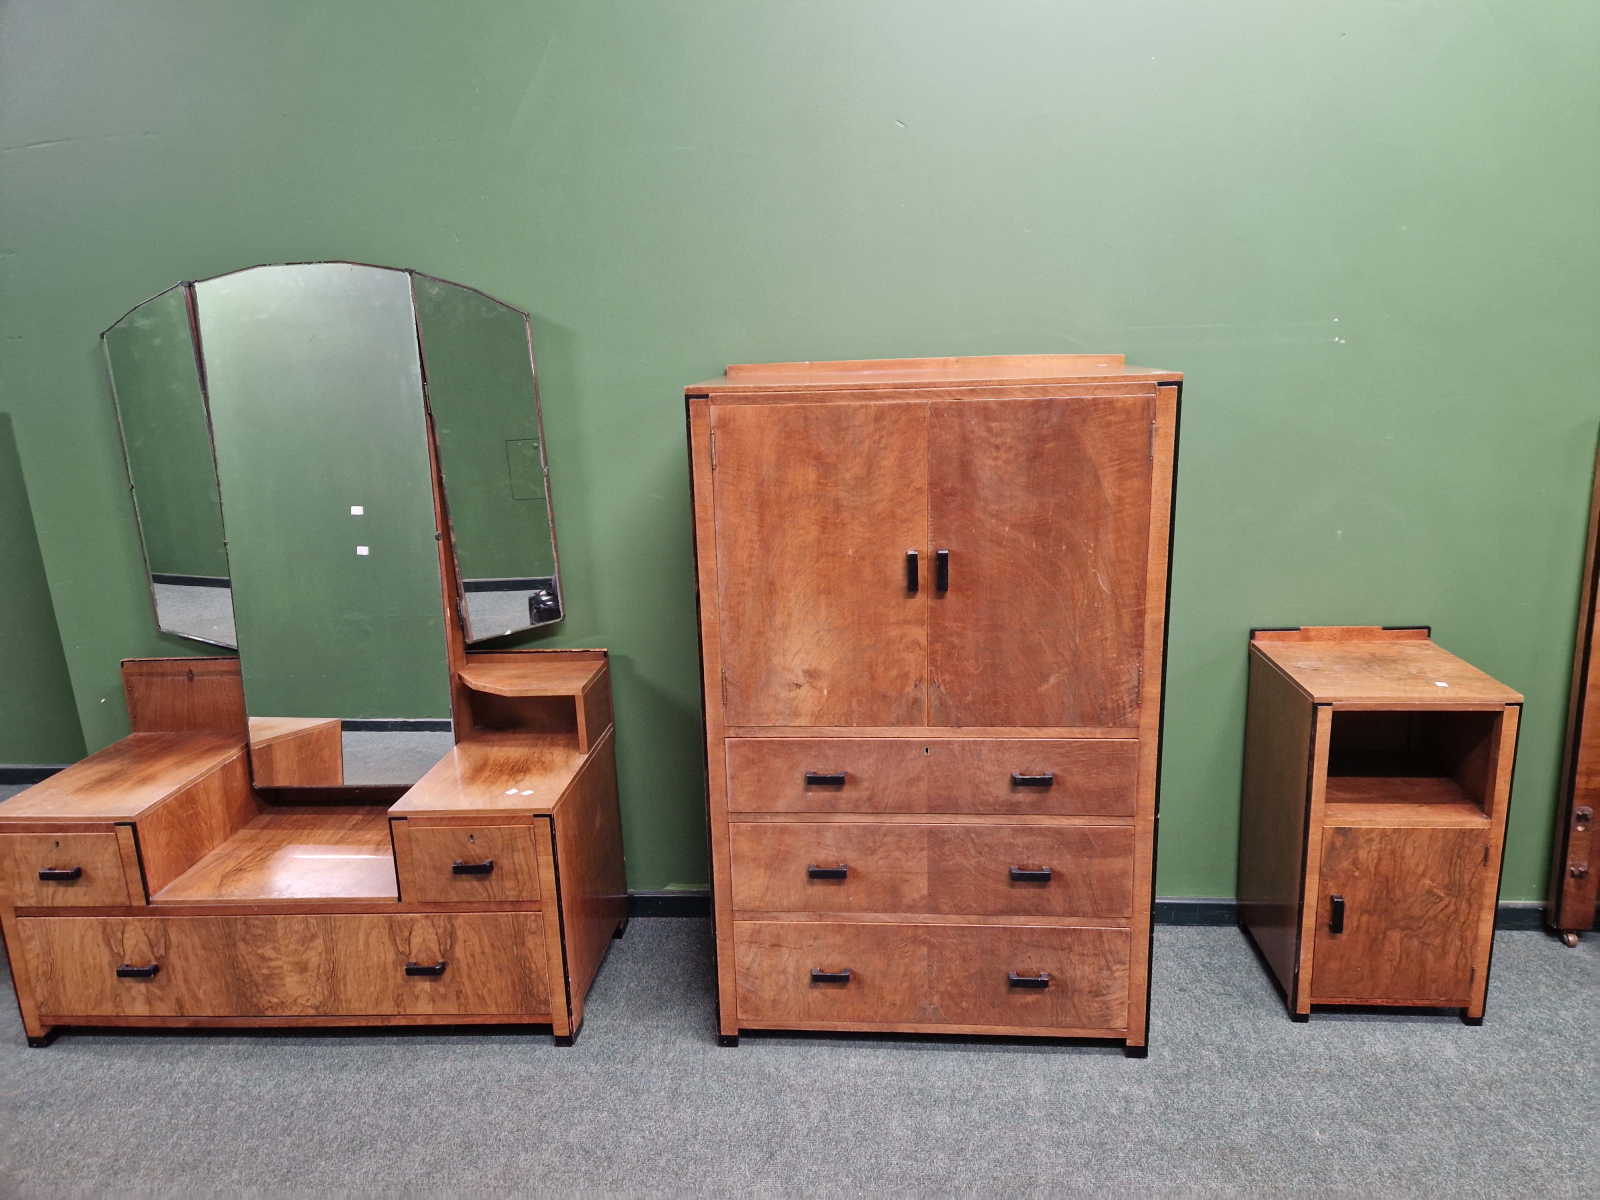 AN ART DECO WALNUT AND EBONISED BEDROOM SUITE COMPRISING LARGE TRIPLE WARDROBE, A TALLBOY, A LOW